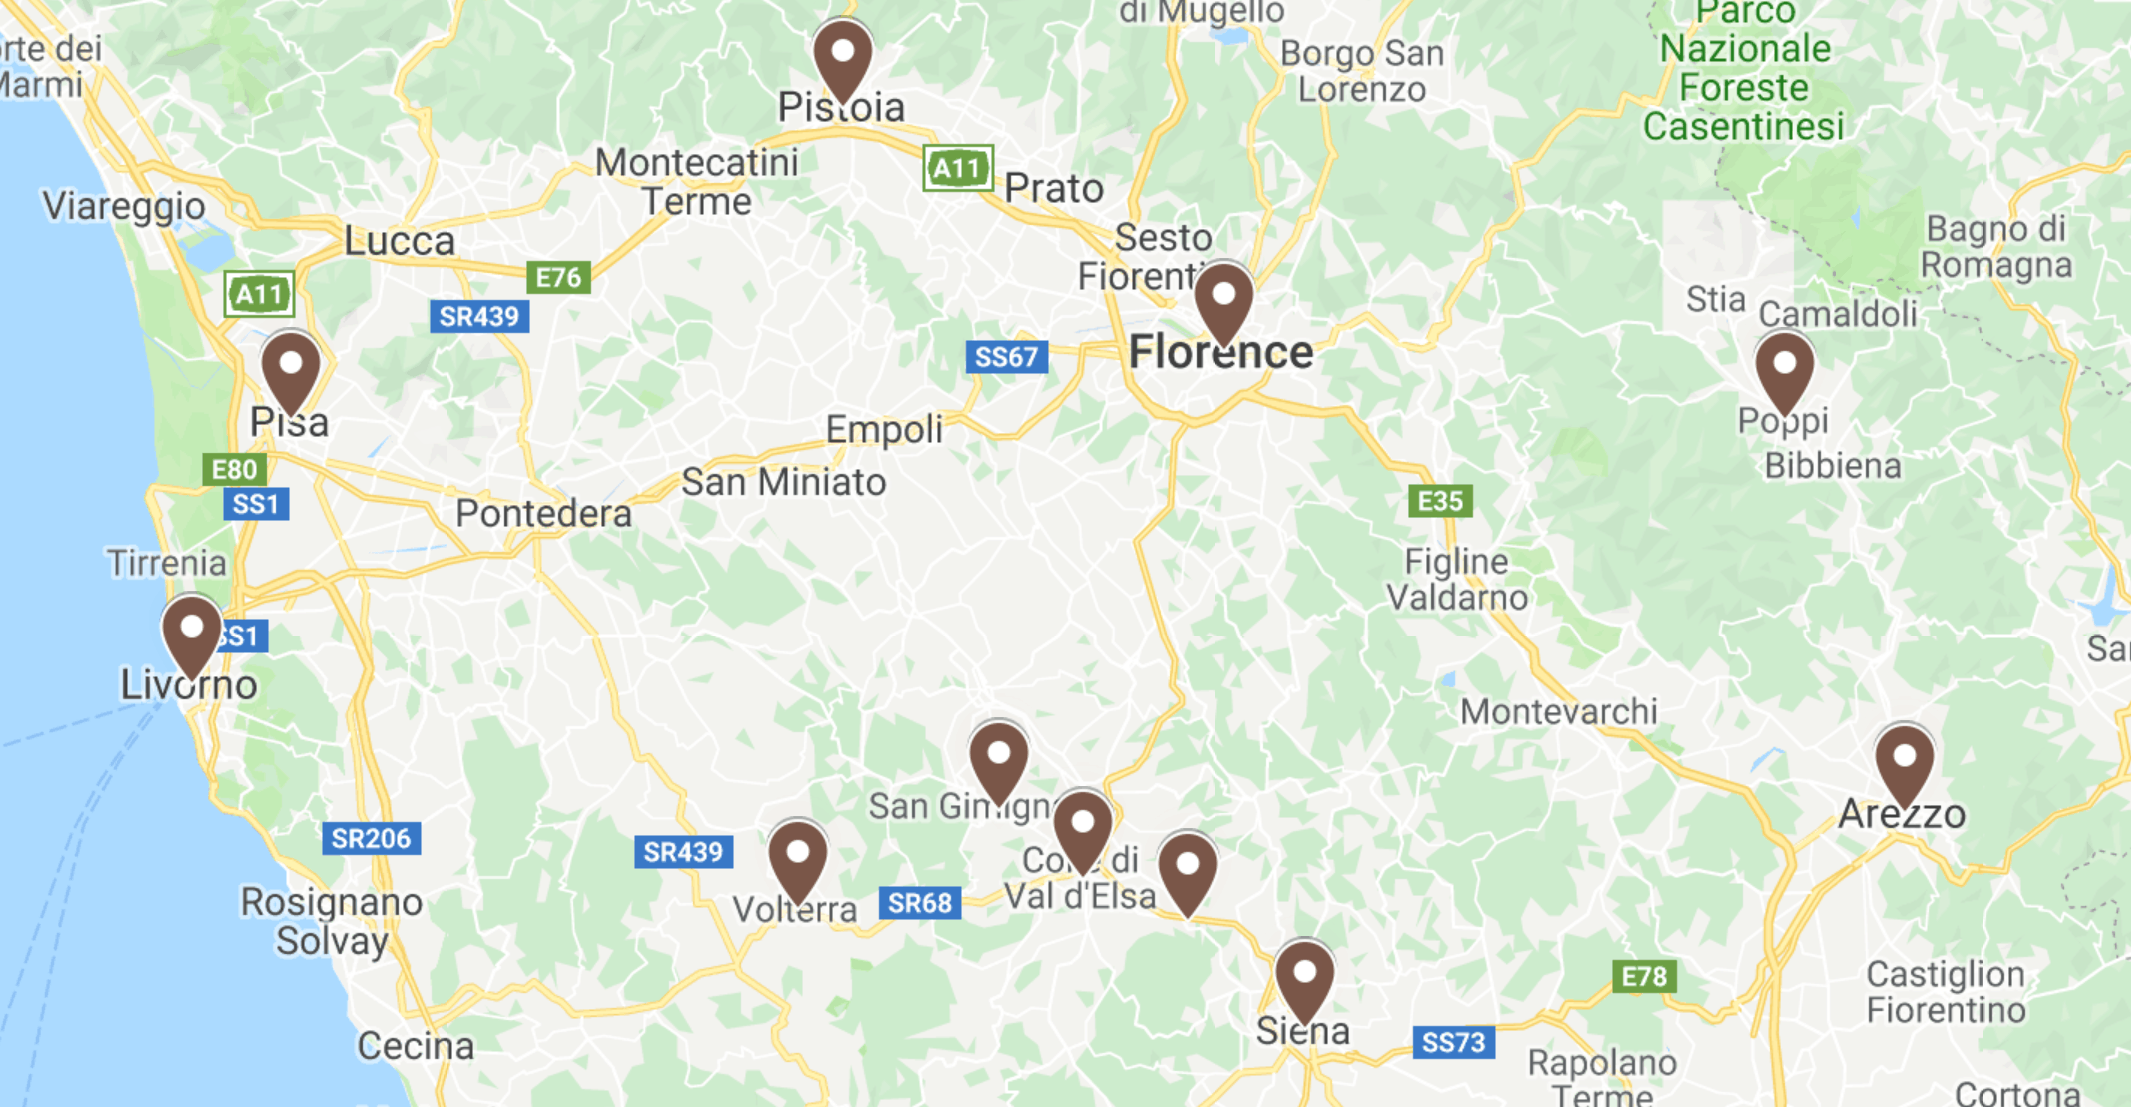 Tuscany Road Trip Map Of Best Stops In Italy | Map Of Best Road Trip Stops In Tuscany 